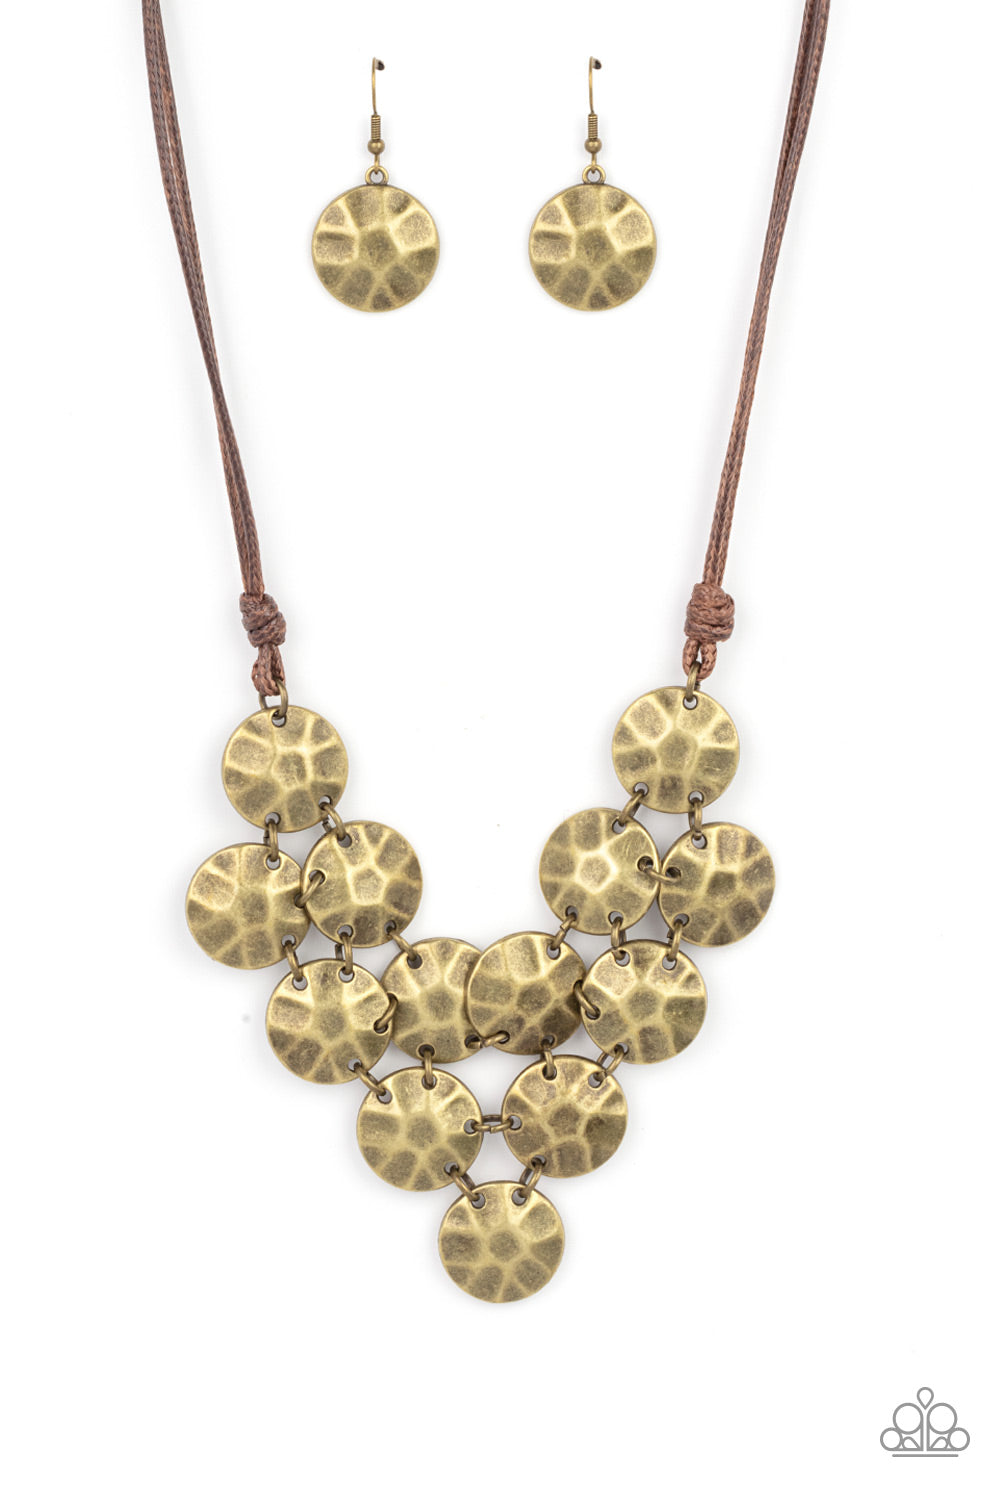 Token Treasure - Brass Hammered Necklaces featuring a hammered finish, a collection of rustic brass discs delicately connect into a netted pendant at the bottom of knotted brown cords for a statement-making look. Features an adjustable clasp closure.  Sold as one individual necklace. Includes one pair of matching earrings.  Paparazzi Jewelry is lead and nickel free so it's perfect for sensitive skin too!